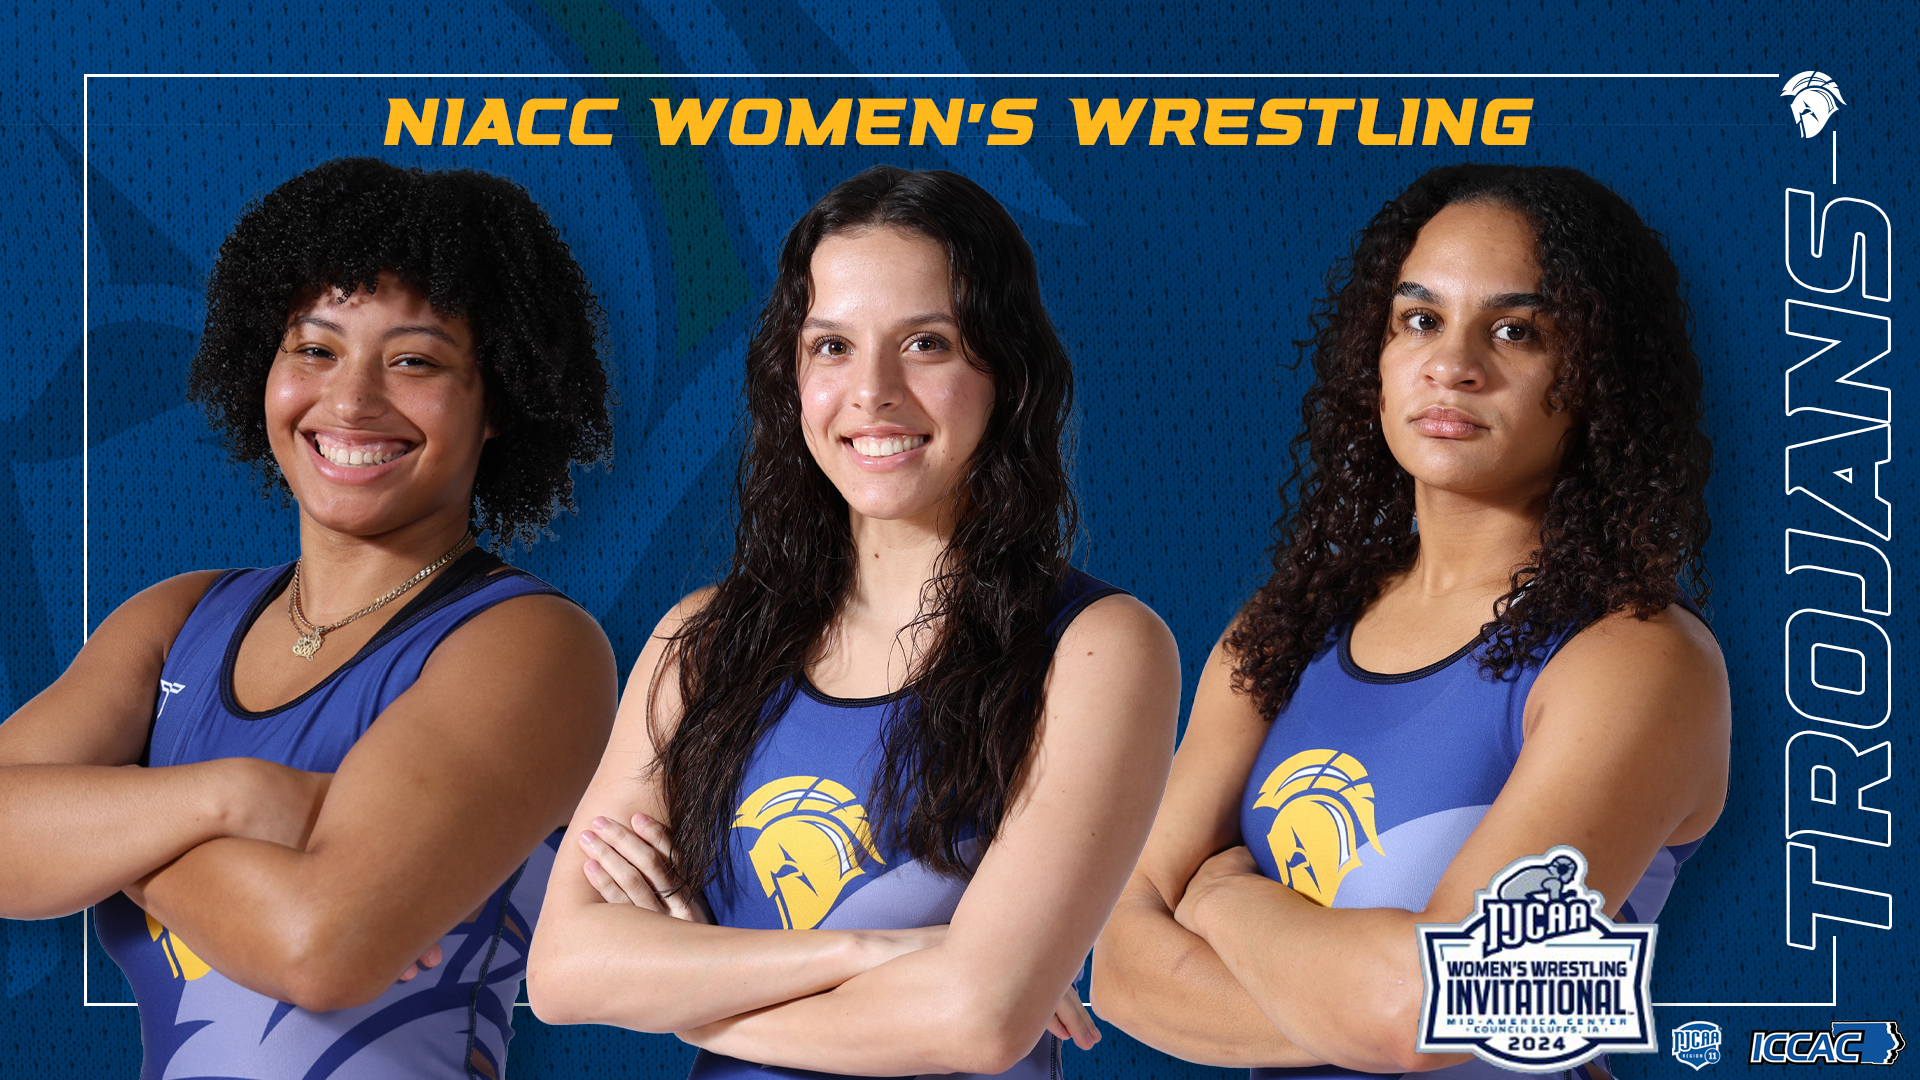 NIACC women set to compete at NJCAA women's wrestling invitational